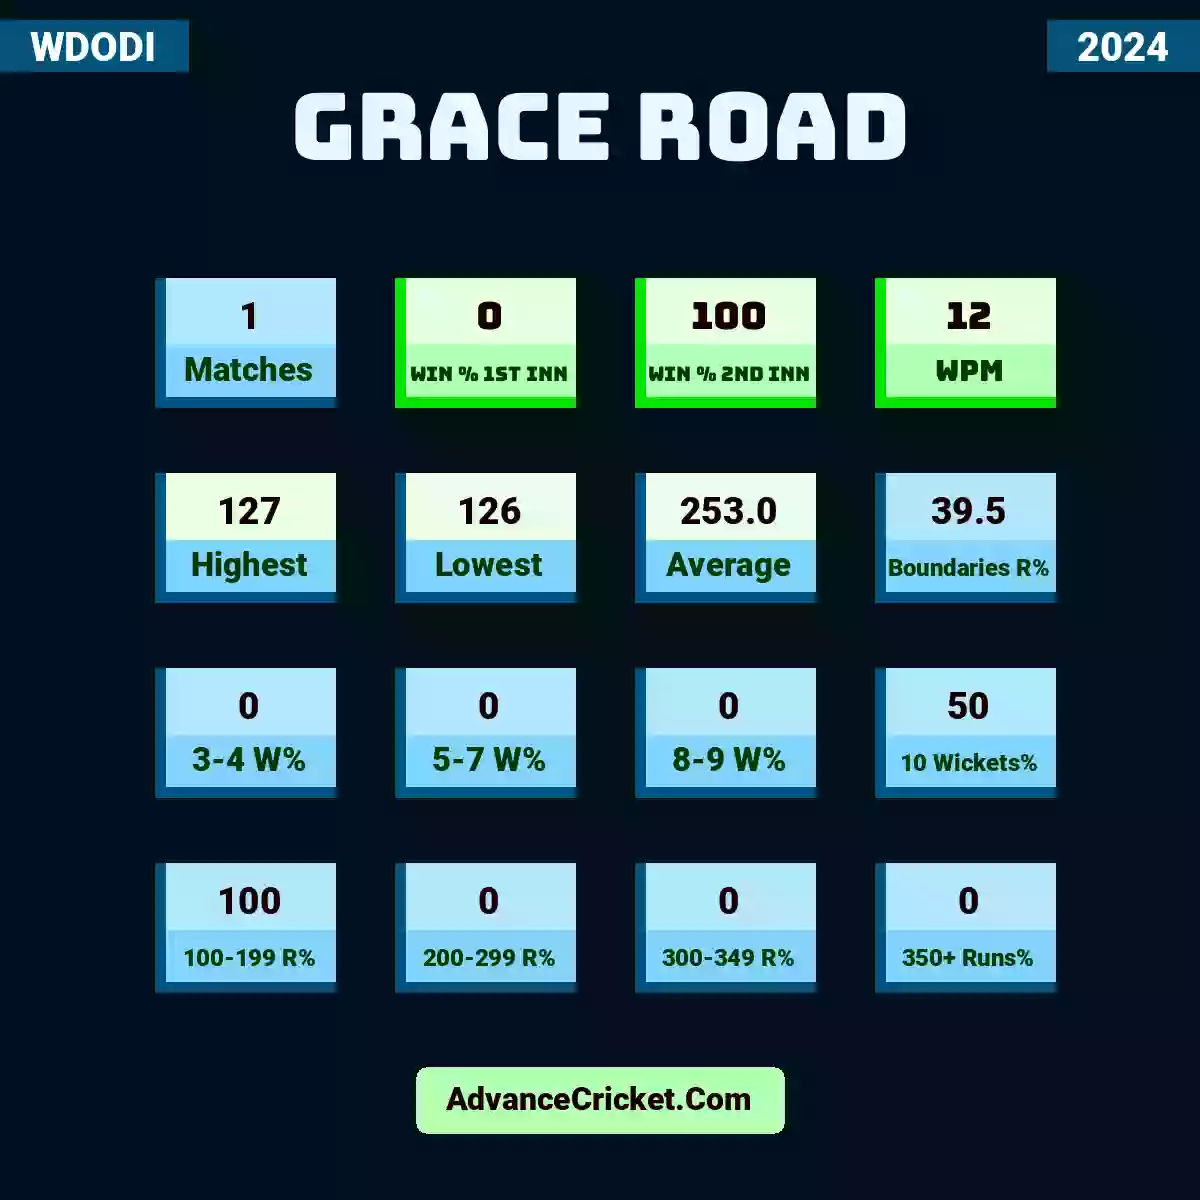 Image showing Grace Road WDODI 2024 with Matches: 1, Win % 1st Inn: 0, Win % 2nd Inn: 100, WPM: 12, Highest: 127, Lowest: 126, Average: 253.0, Boundaries R%: 39.5, 3-4 W%: 0, 5-7 W%: 0, 8-9 W%: 0, 10 Wickets%: 50, 100-199 R%: 100, 200-299 R%: 0, 300-349 R%: 0, 350+ Runs%: 0.